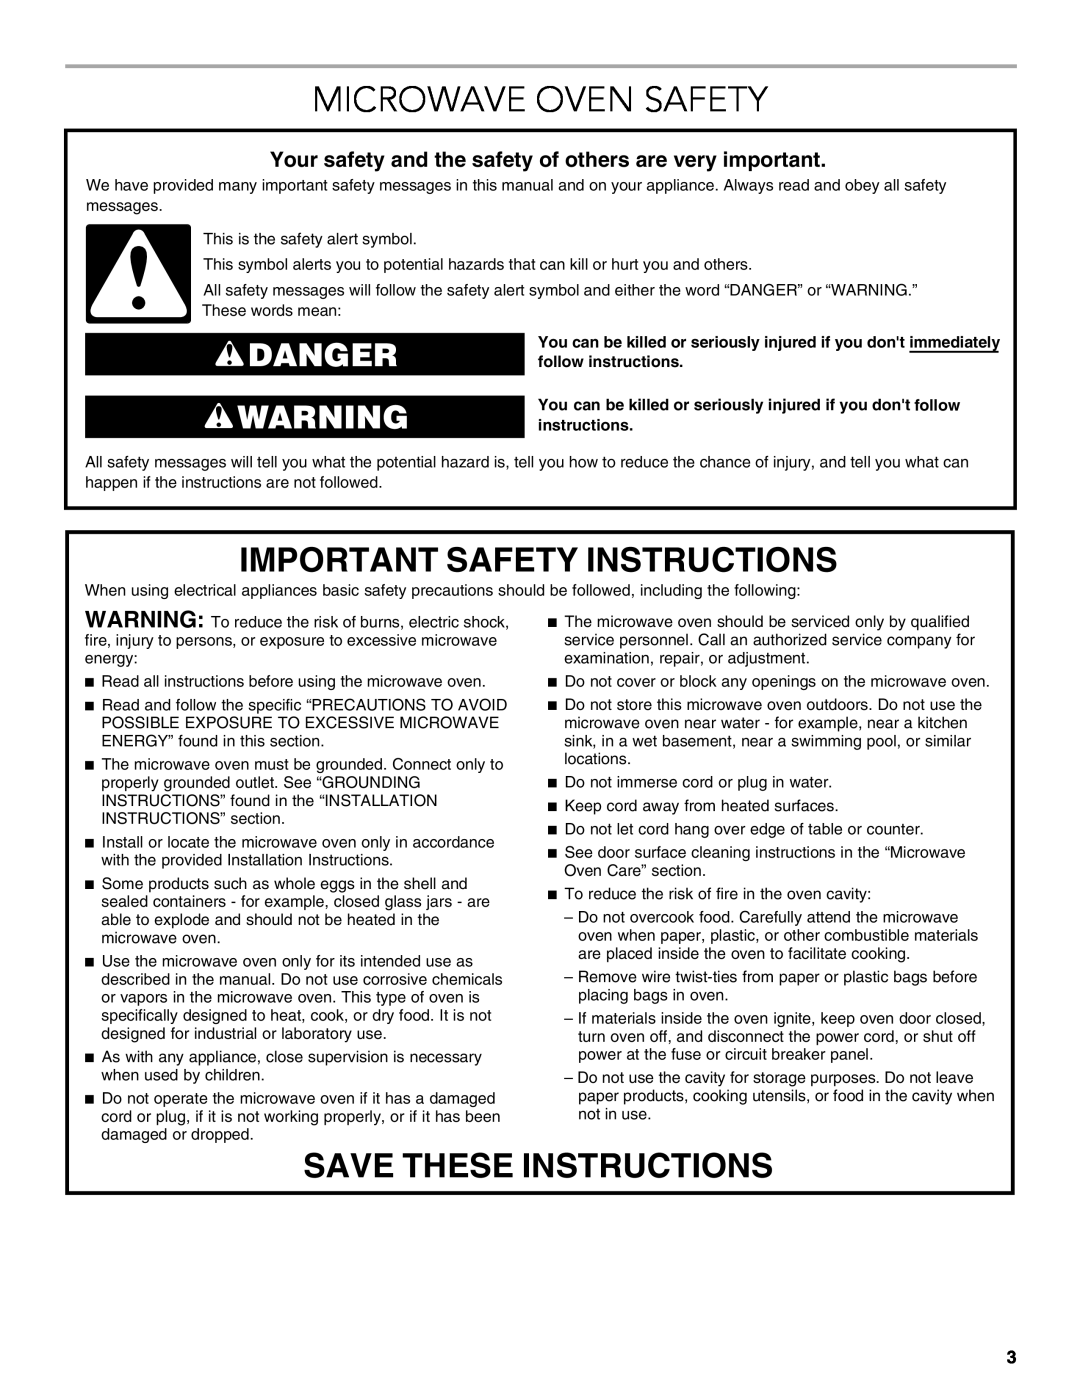 KitchenAid KCMS2255 manual Microwave Oven Safety, Important Safety Instructions, Save These Instructions, Danger 